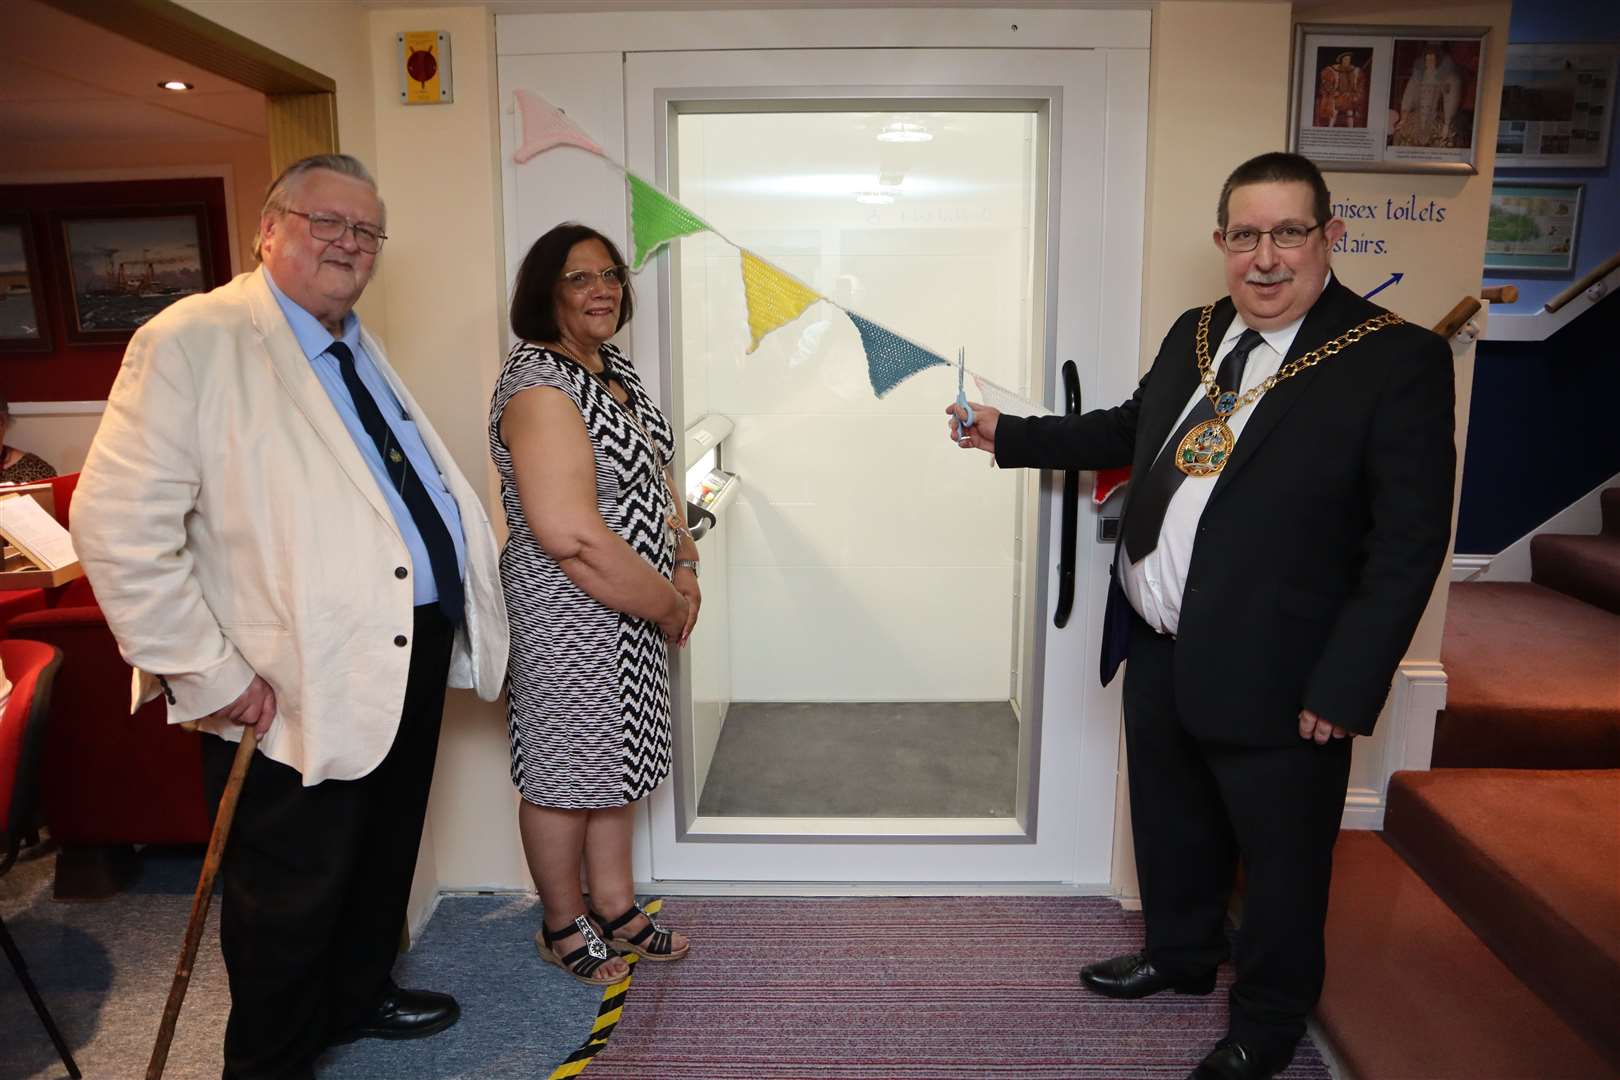 Ken Ingleton and Jenny Hurkett watch as Swale mayor Cllr Simon Clark cuts the bunting to officially open the new lift at the Criterion Theatre